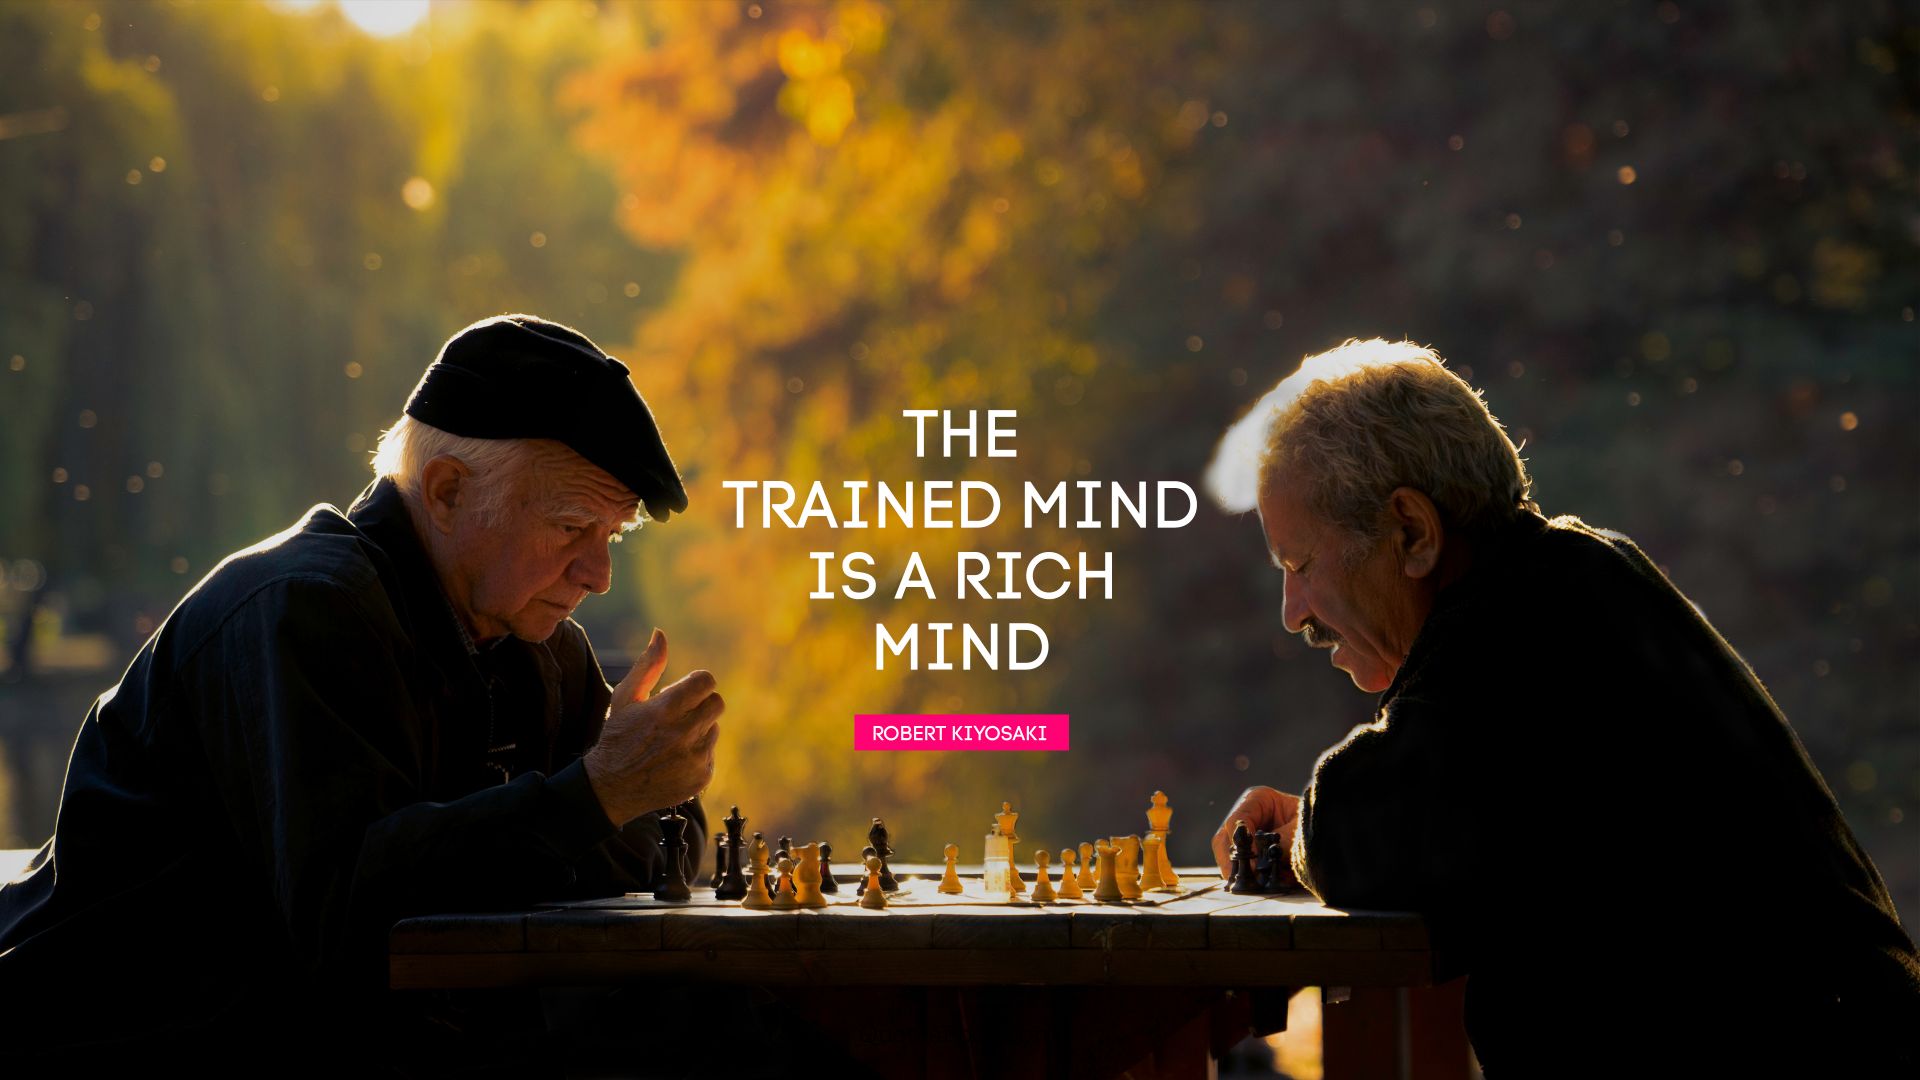 The trained mind is a rich mind. - Quote by Robert Kiyosaki